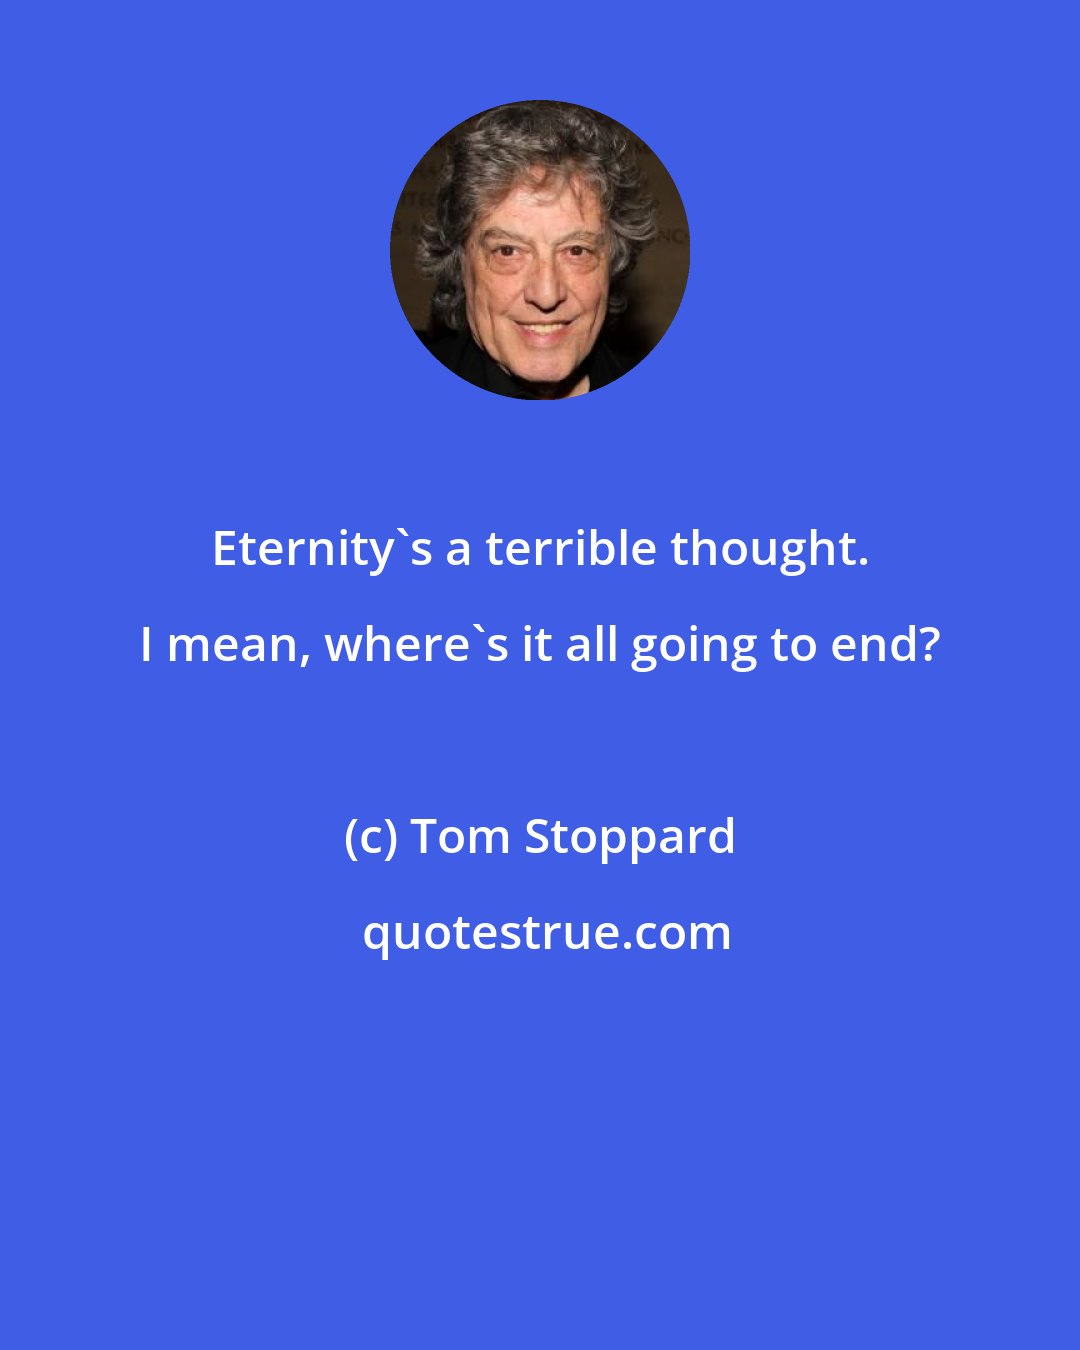 Tom Stoppard: Eternity's a terrible thought. I mean, where's it all going to end?